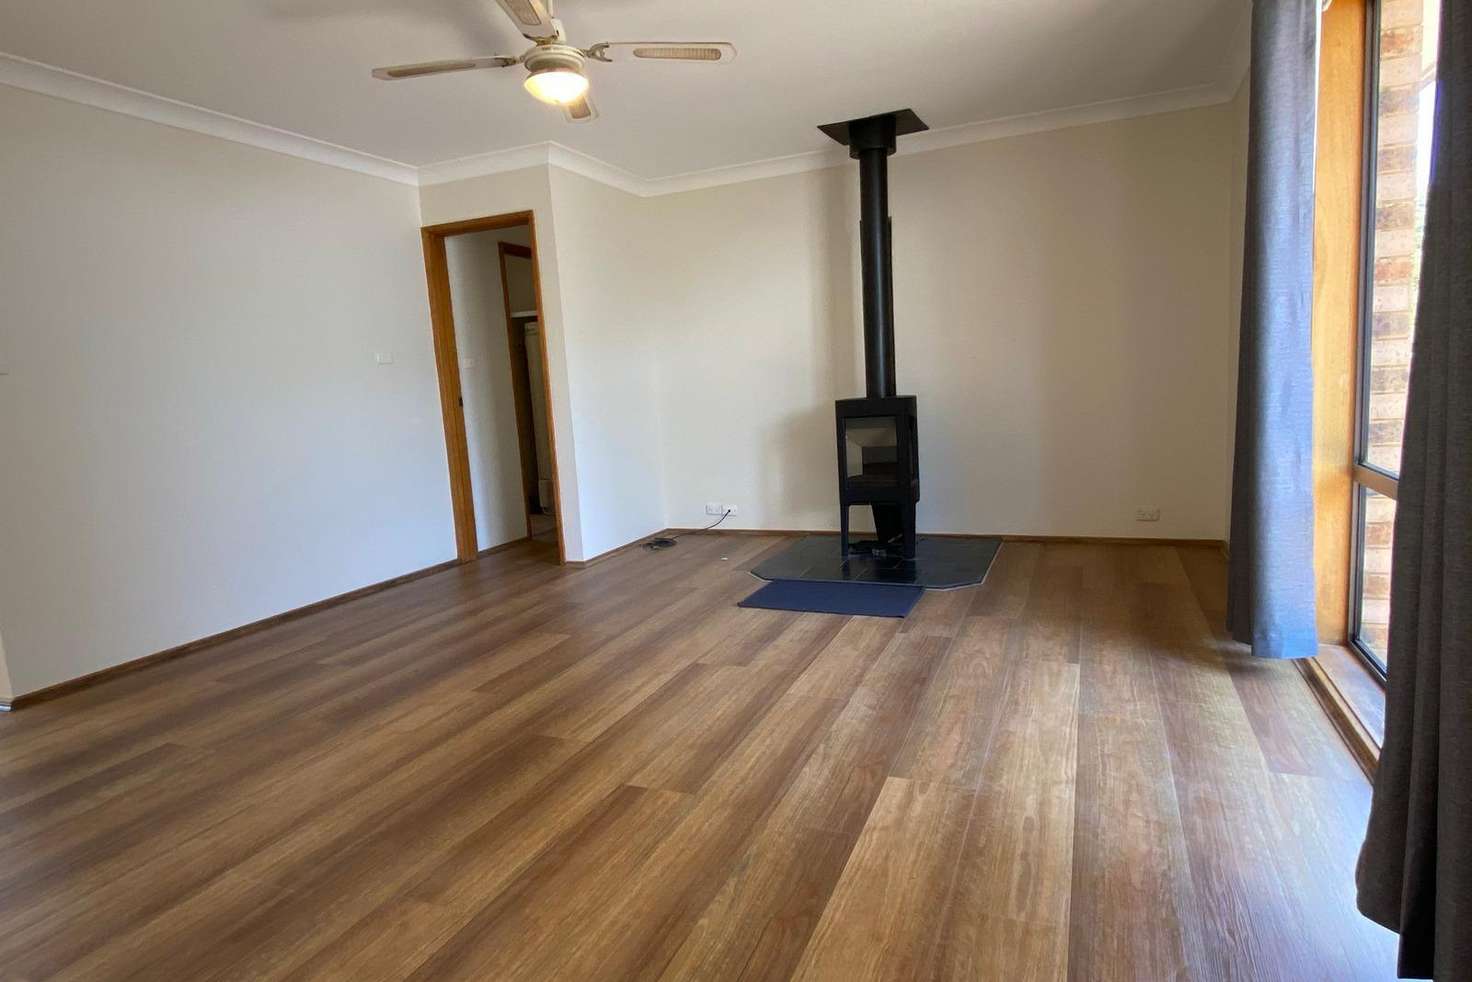 Main view of Homely townhouse listing, 1/50 Bywong Street, Sutton NSW 2620